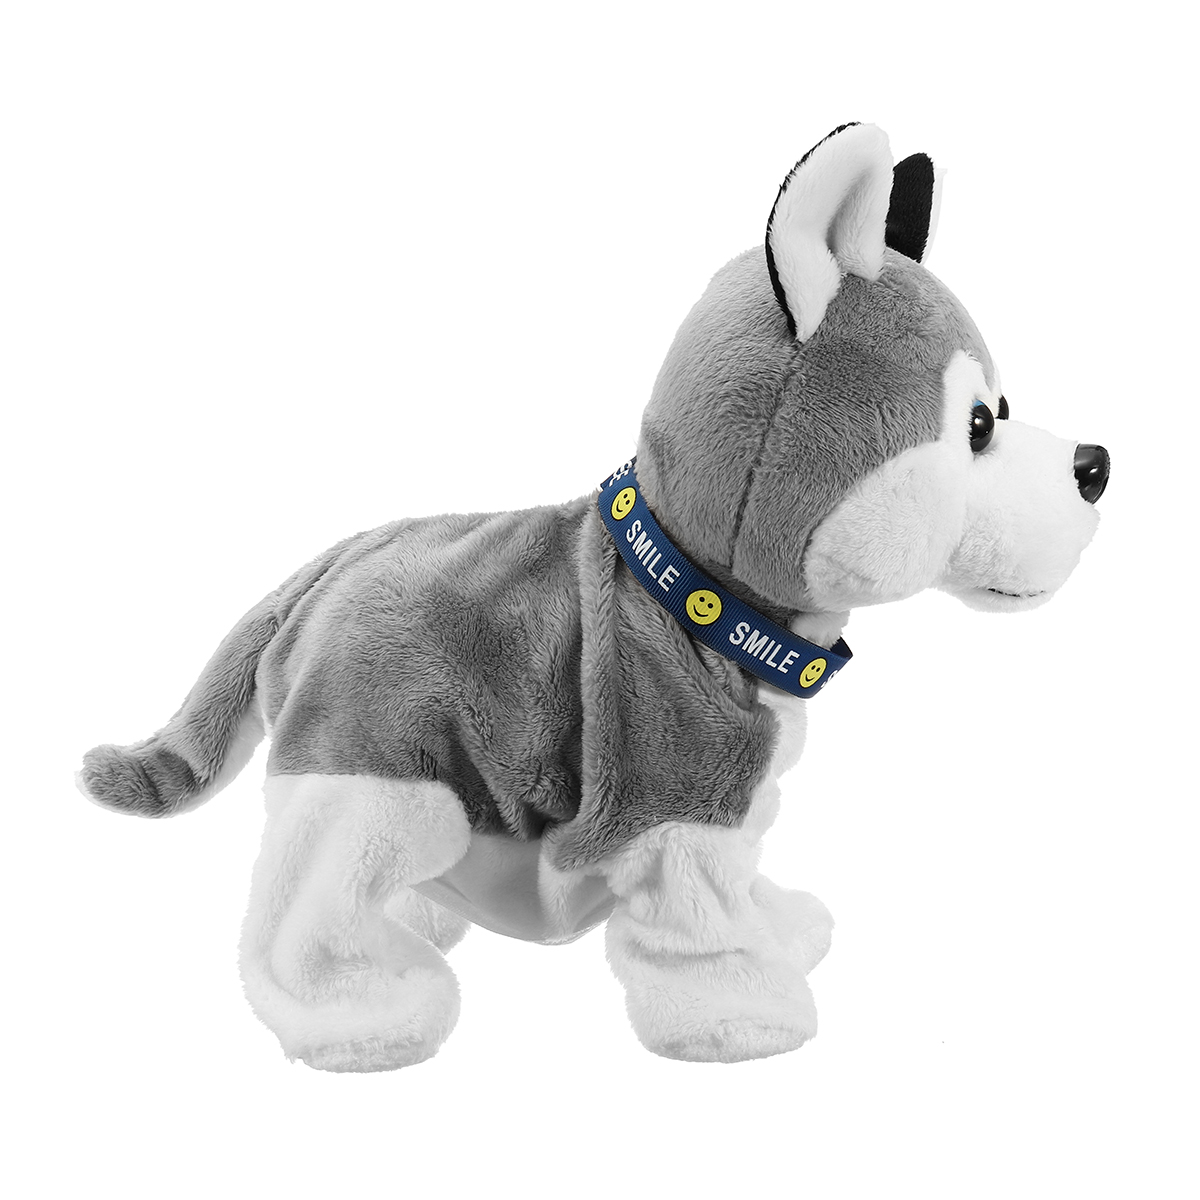 Interactive-Dog-Electronic-Pet-Stuffed-Plush-Toy-Control-Walk-Sound-Husky-Reacts-Touch-1414452-5